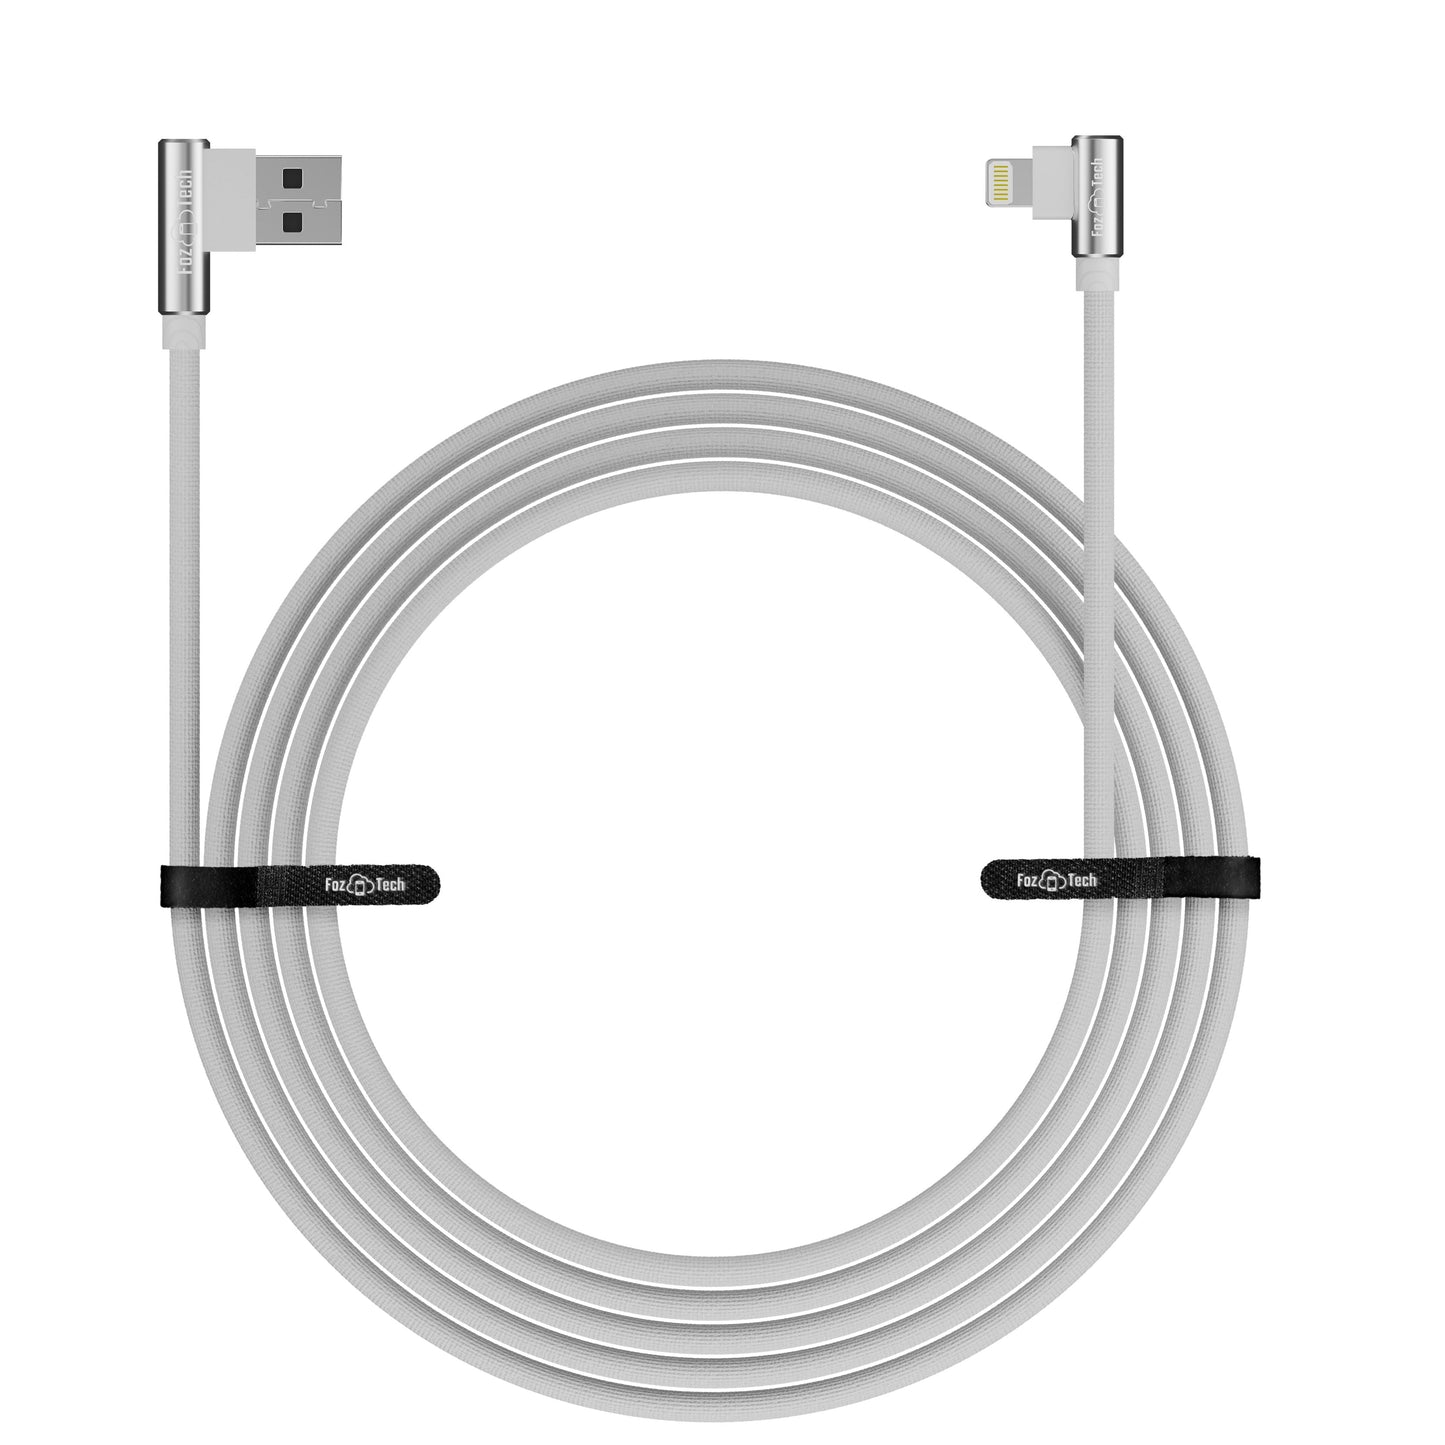 FozTech - Angled Series - Angled USB Charger Cable Data Sync Lead for iPhone, iPad, iPod - Silver - USB Cable - FozTech